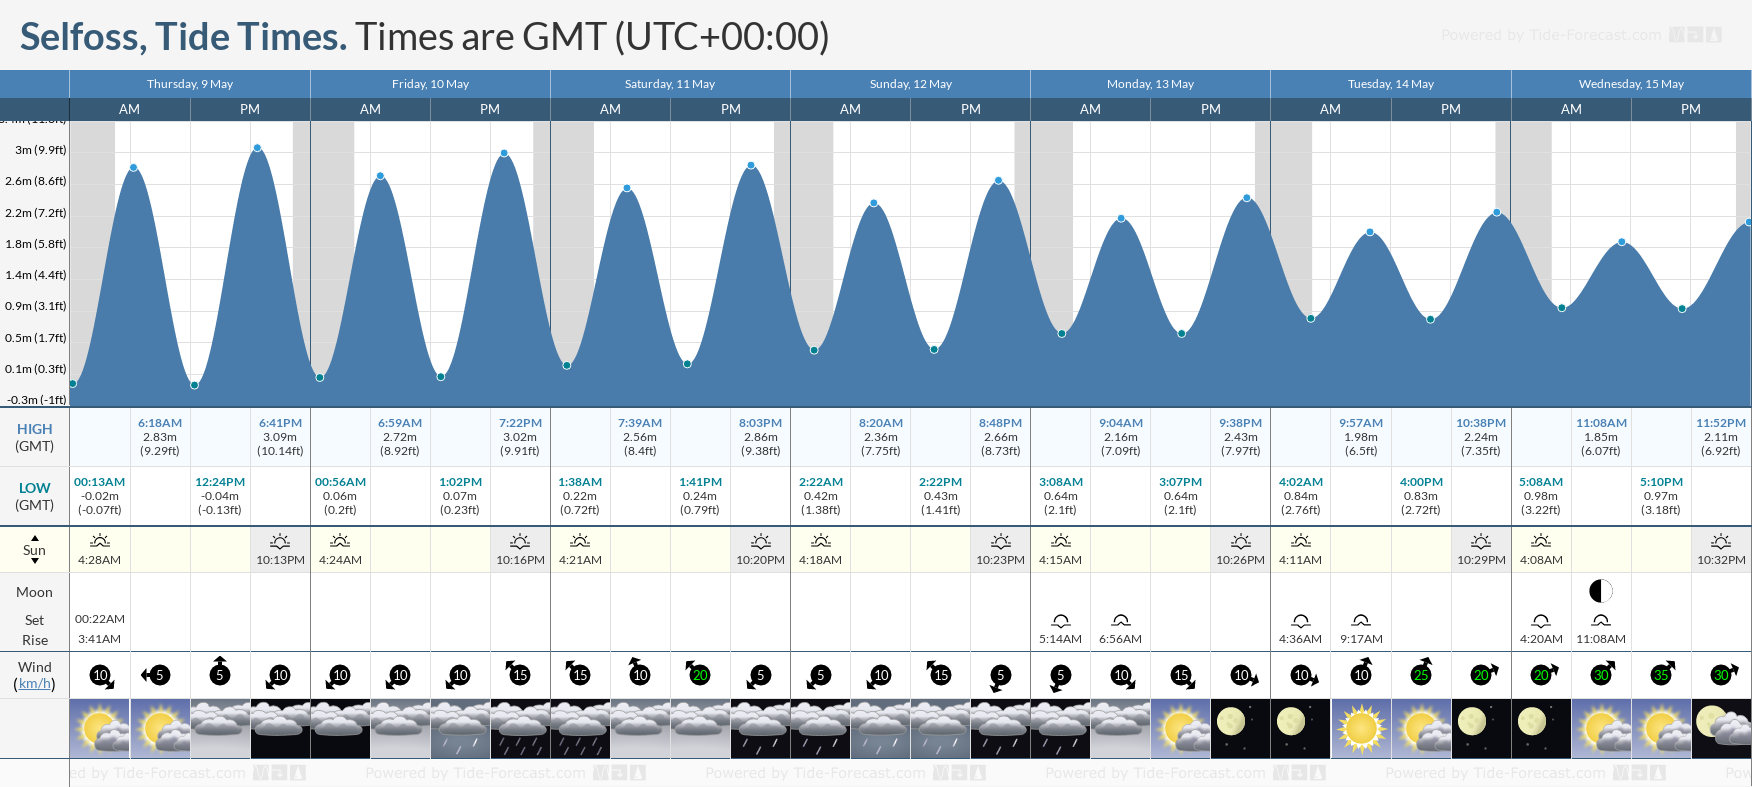 Selfoss Tide Chart including high and low tide tide times for the next 7 days